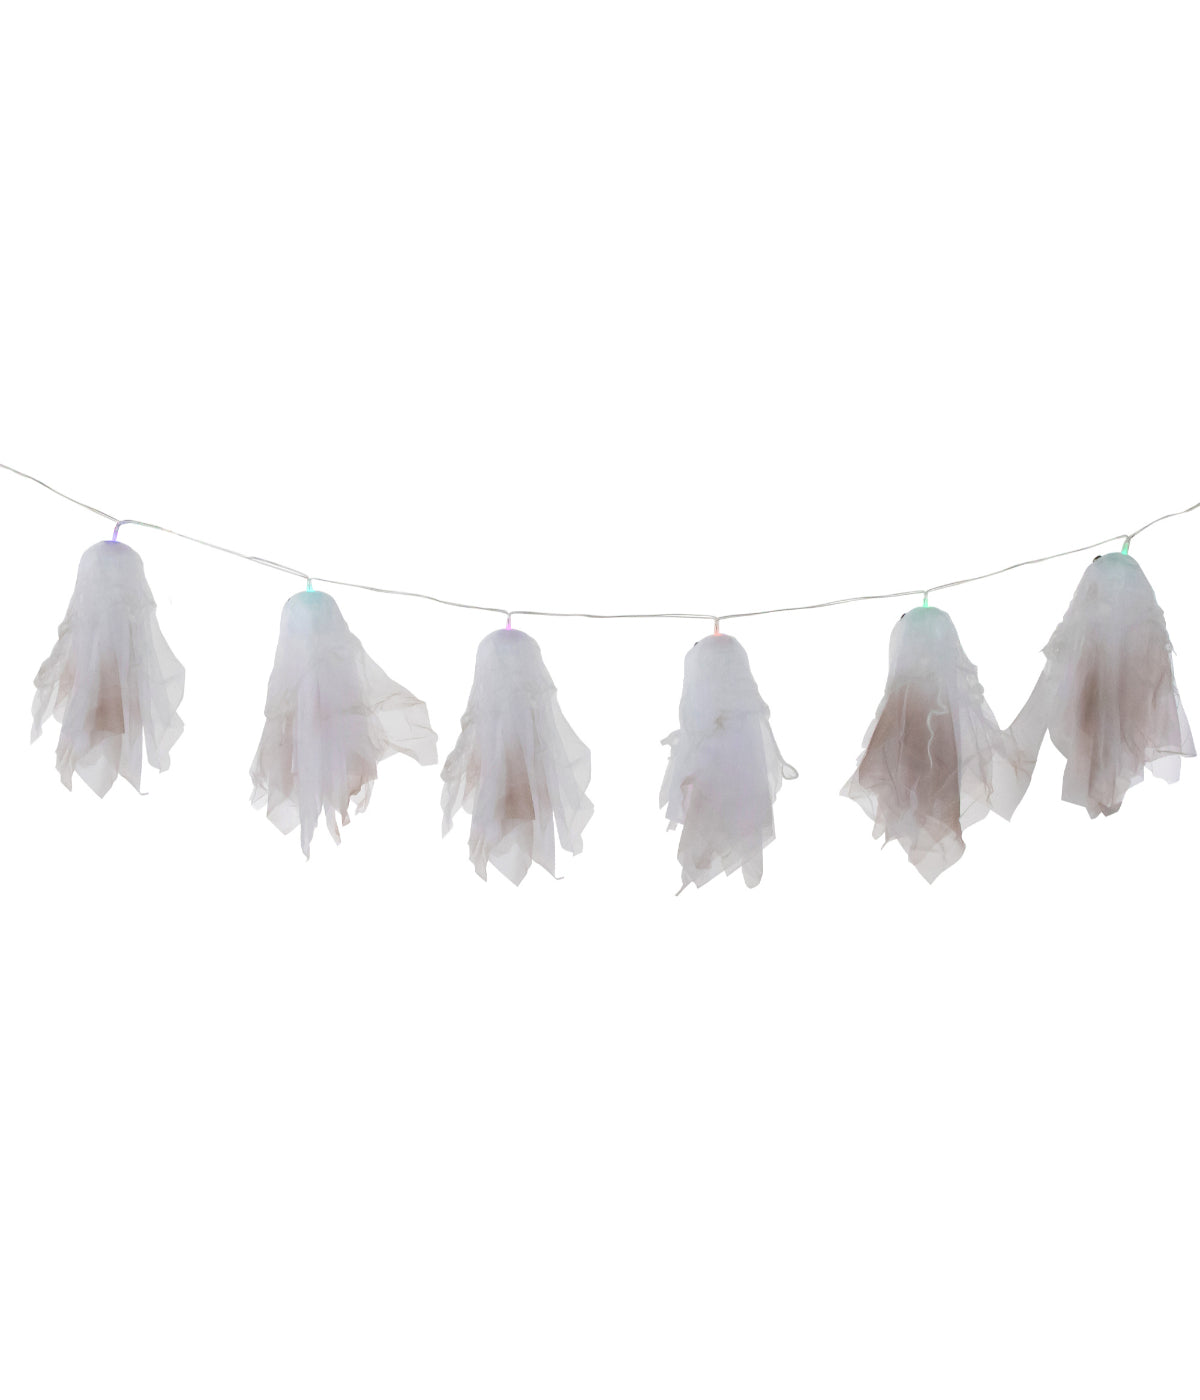 Pre-Lit Ghost Color Changing Hanging Halloween Lights